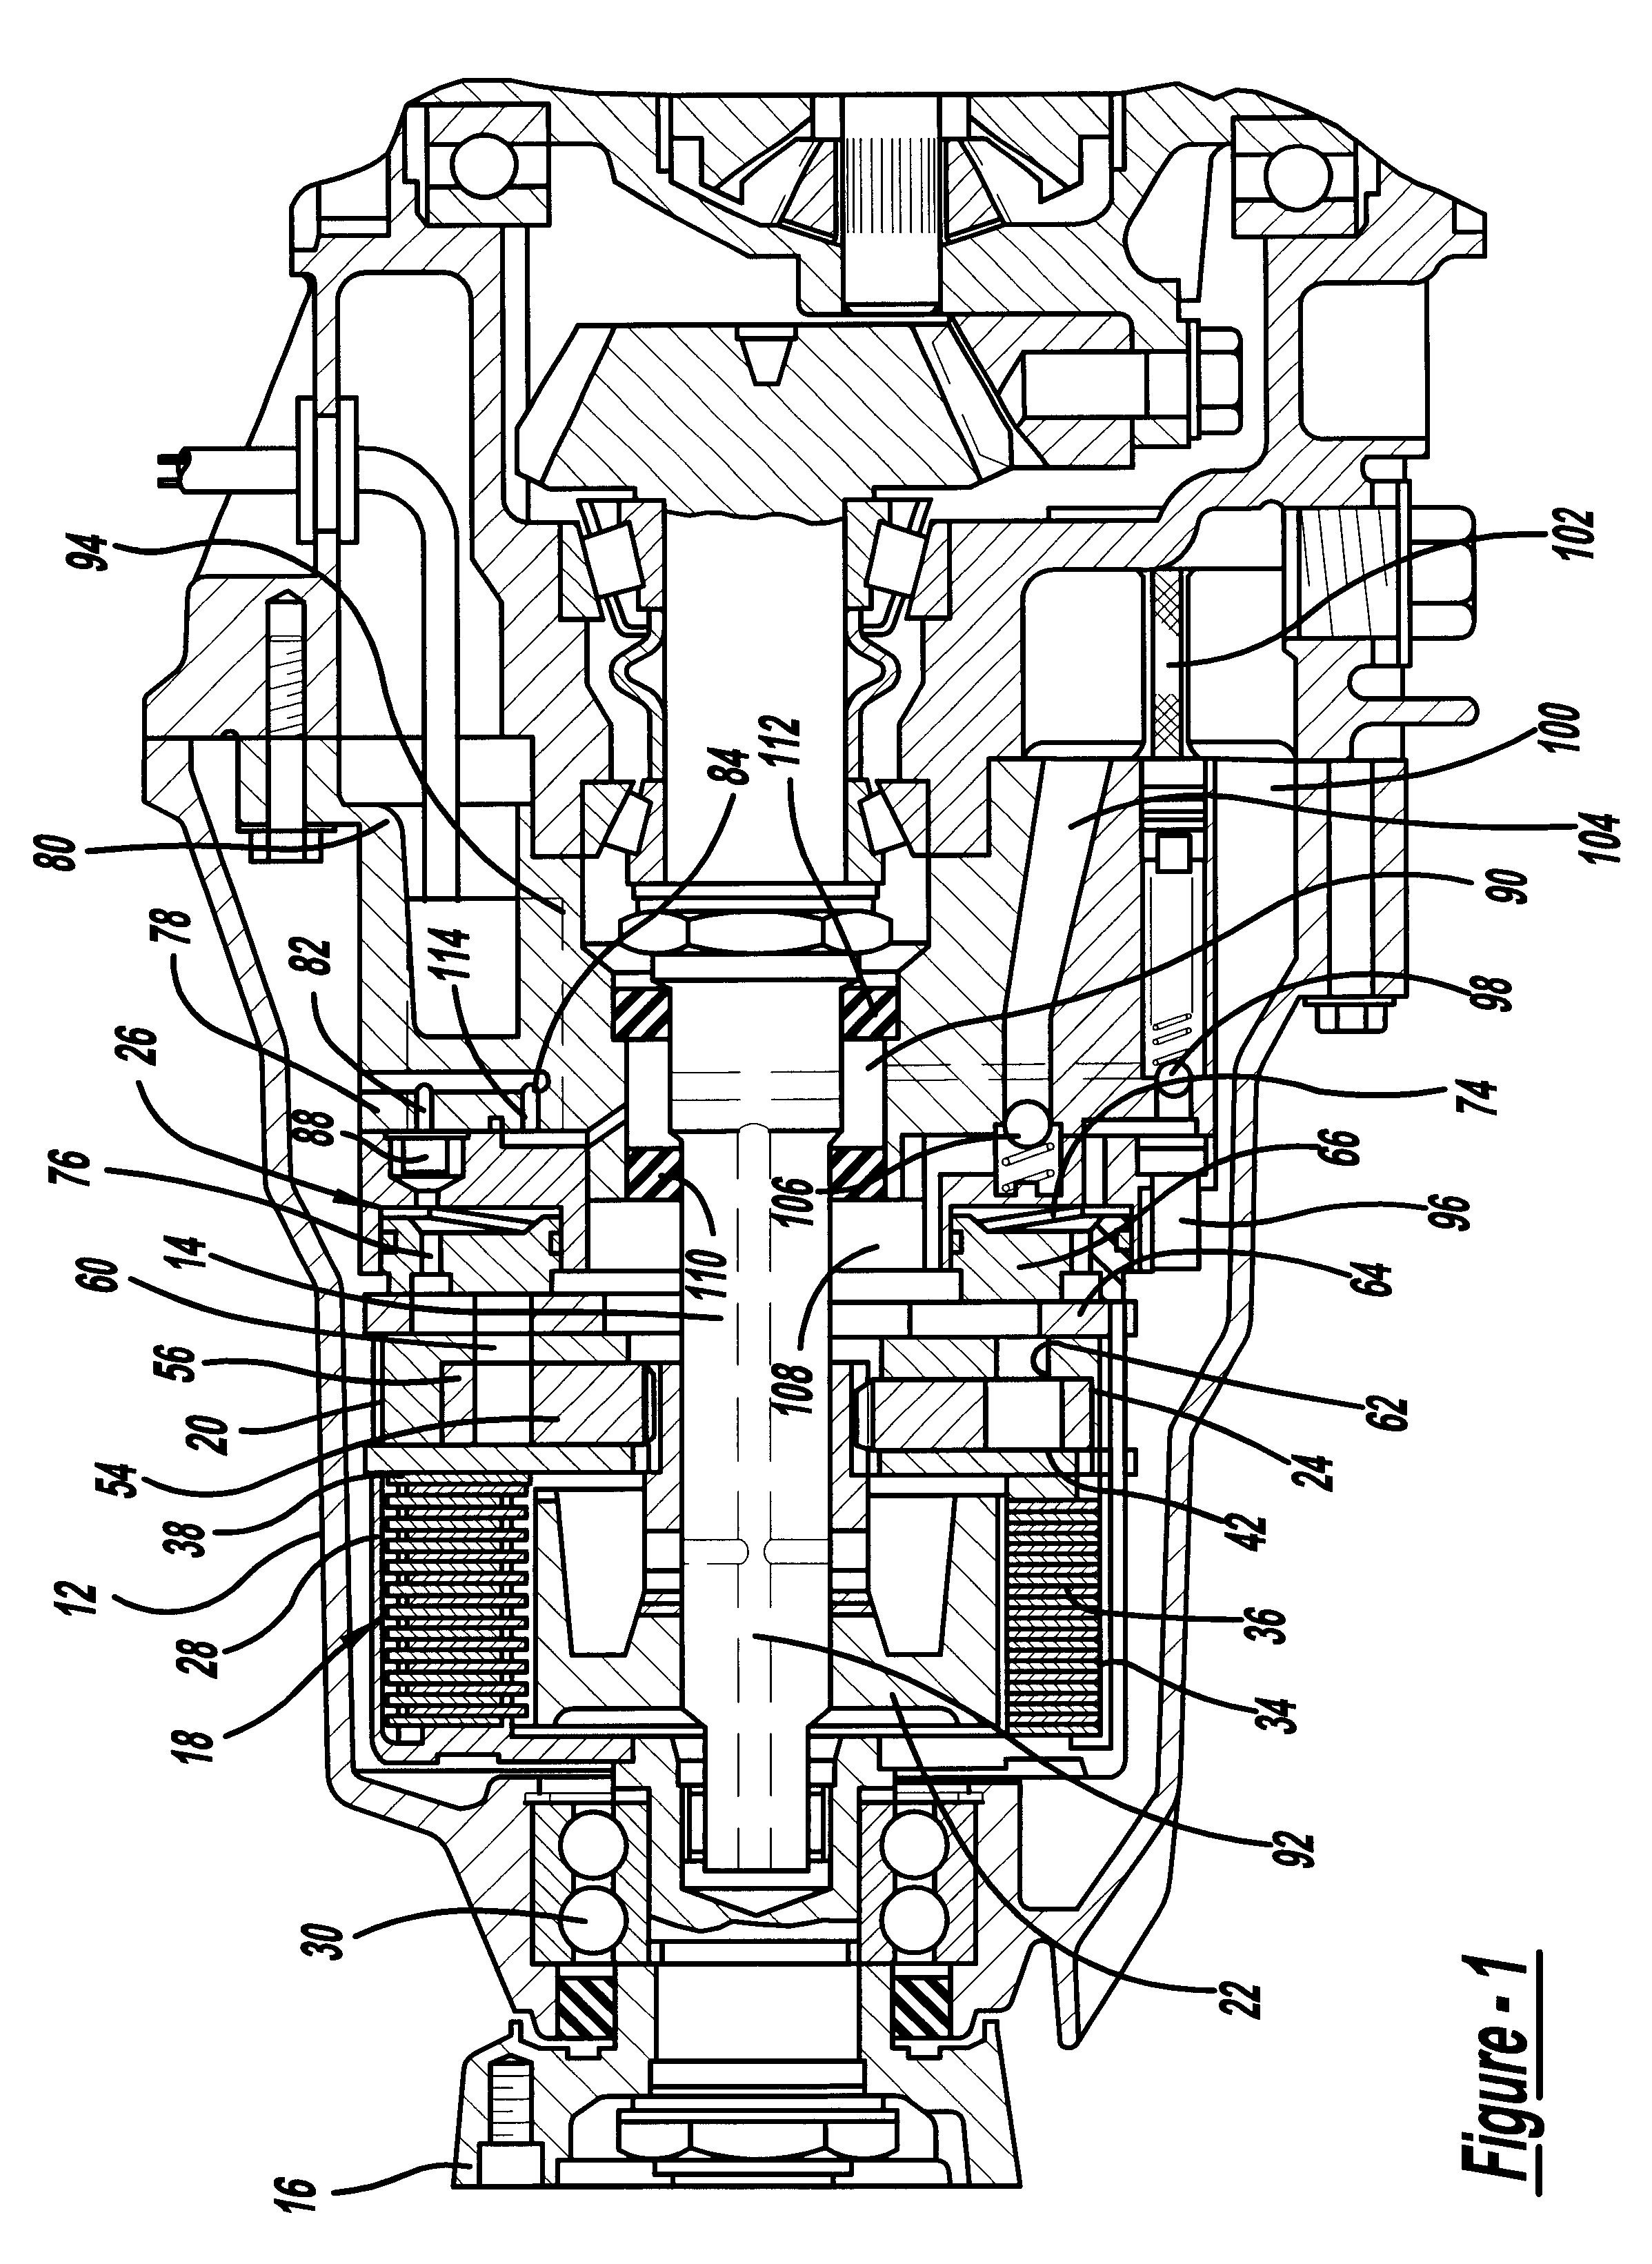 Externally controlled hydraulic torque transfer device